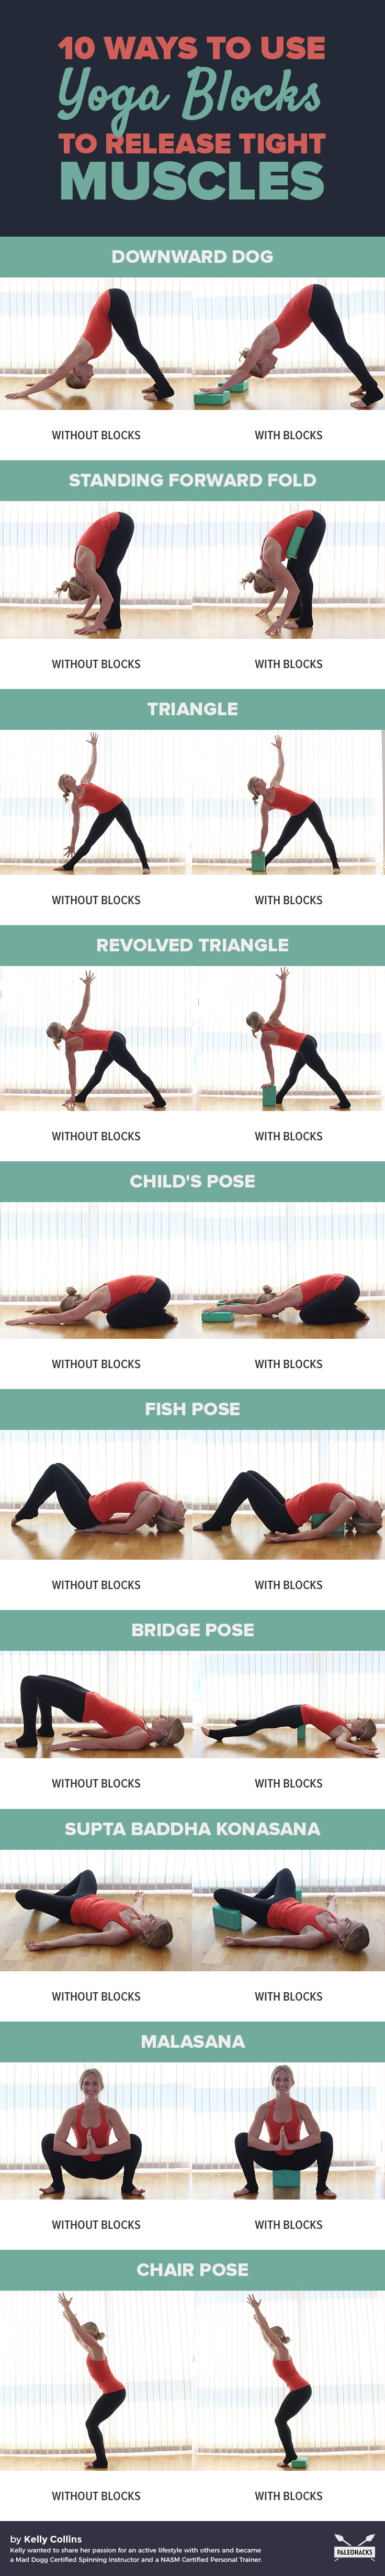 Whether you’re new to yoga or trying to ease your way back in, blocks are great tools to use to help you get into poses safely.